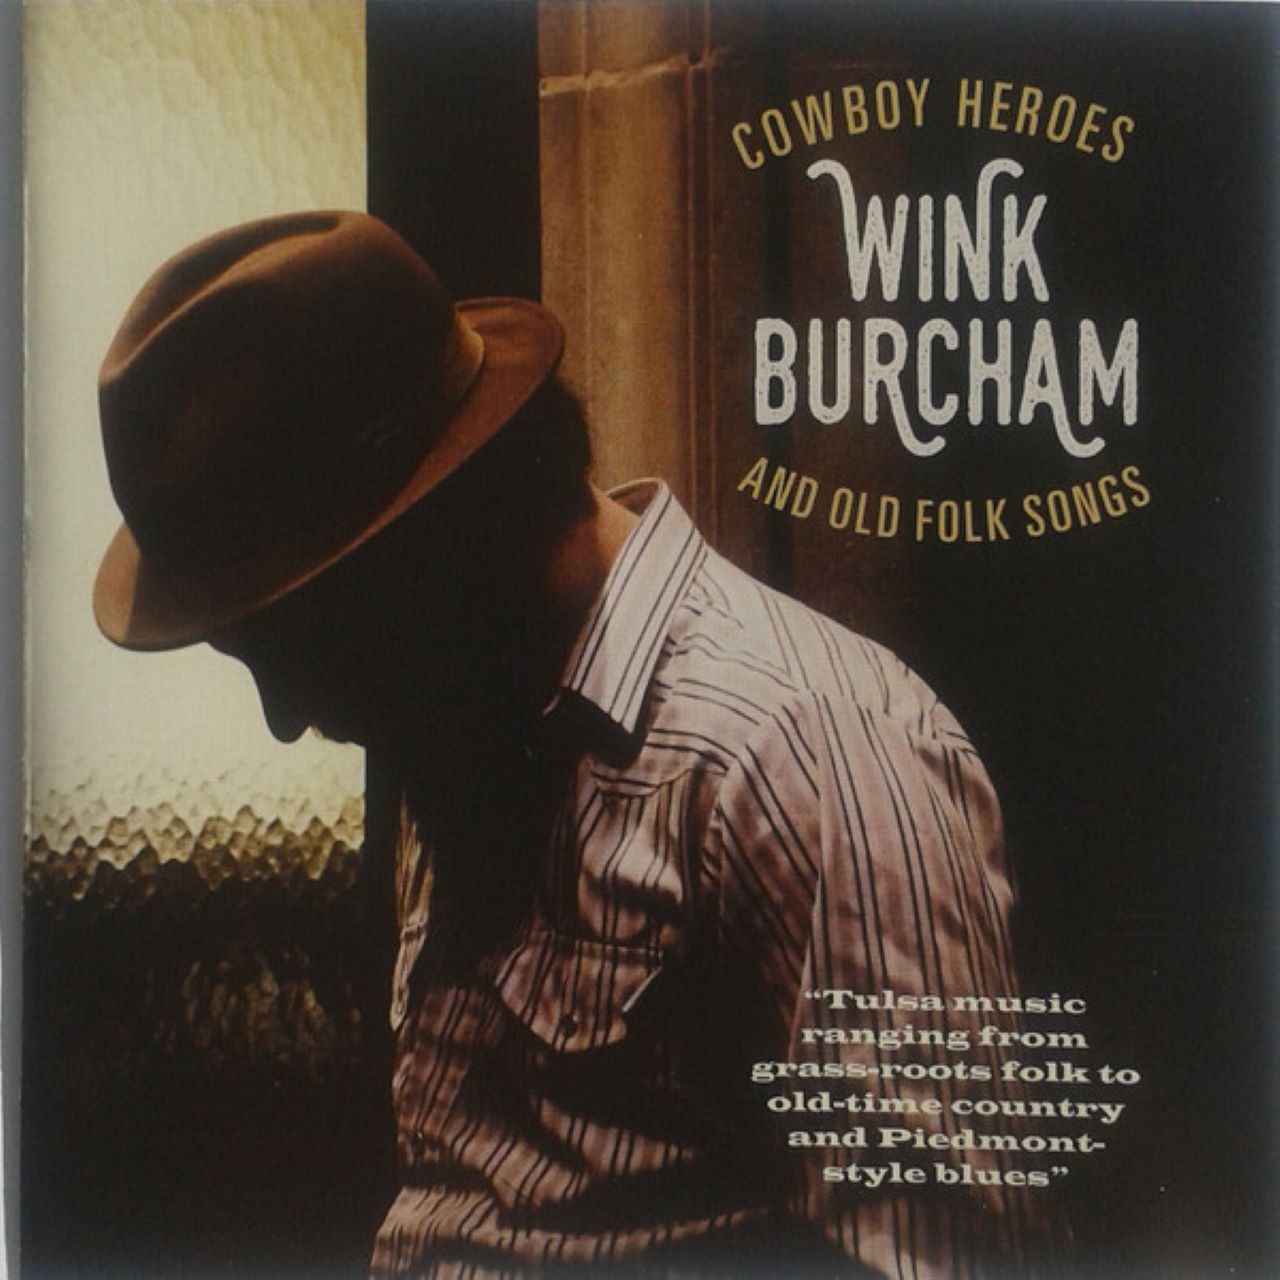 Wink Burcham - Cowboy Heroes And Old Folk Songs cover album